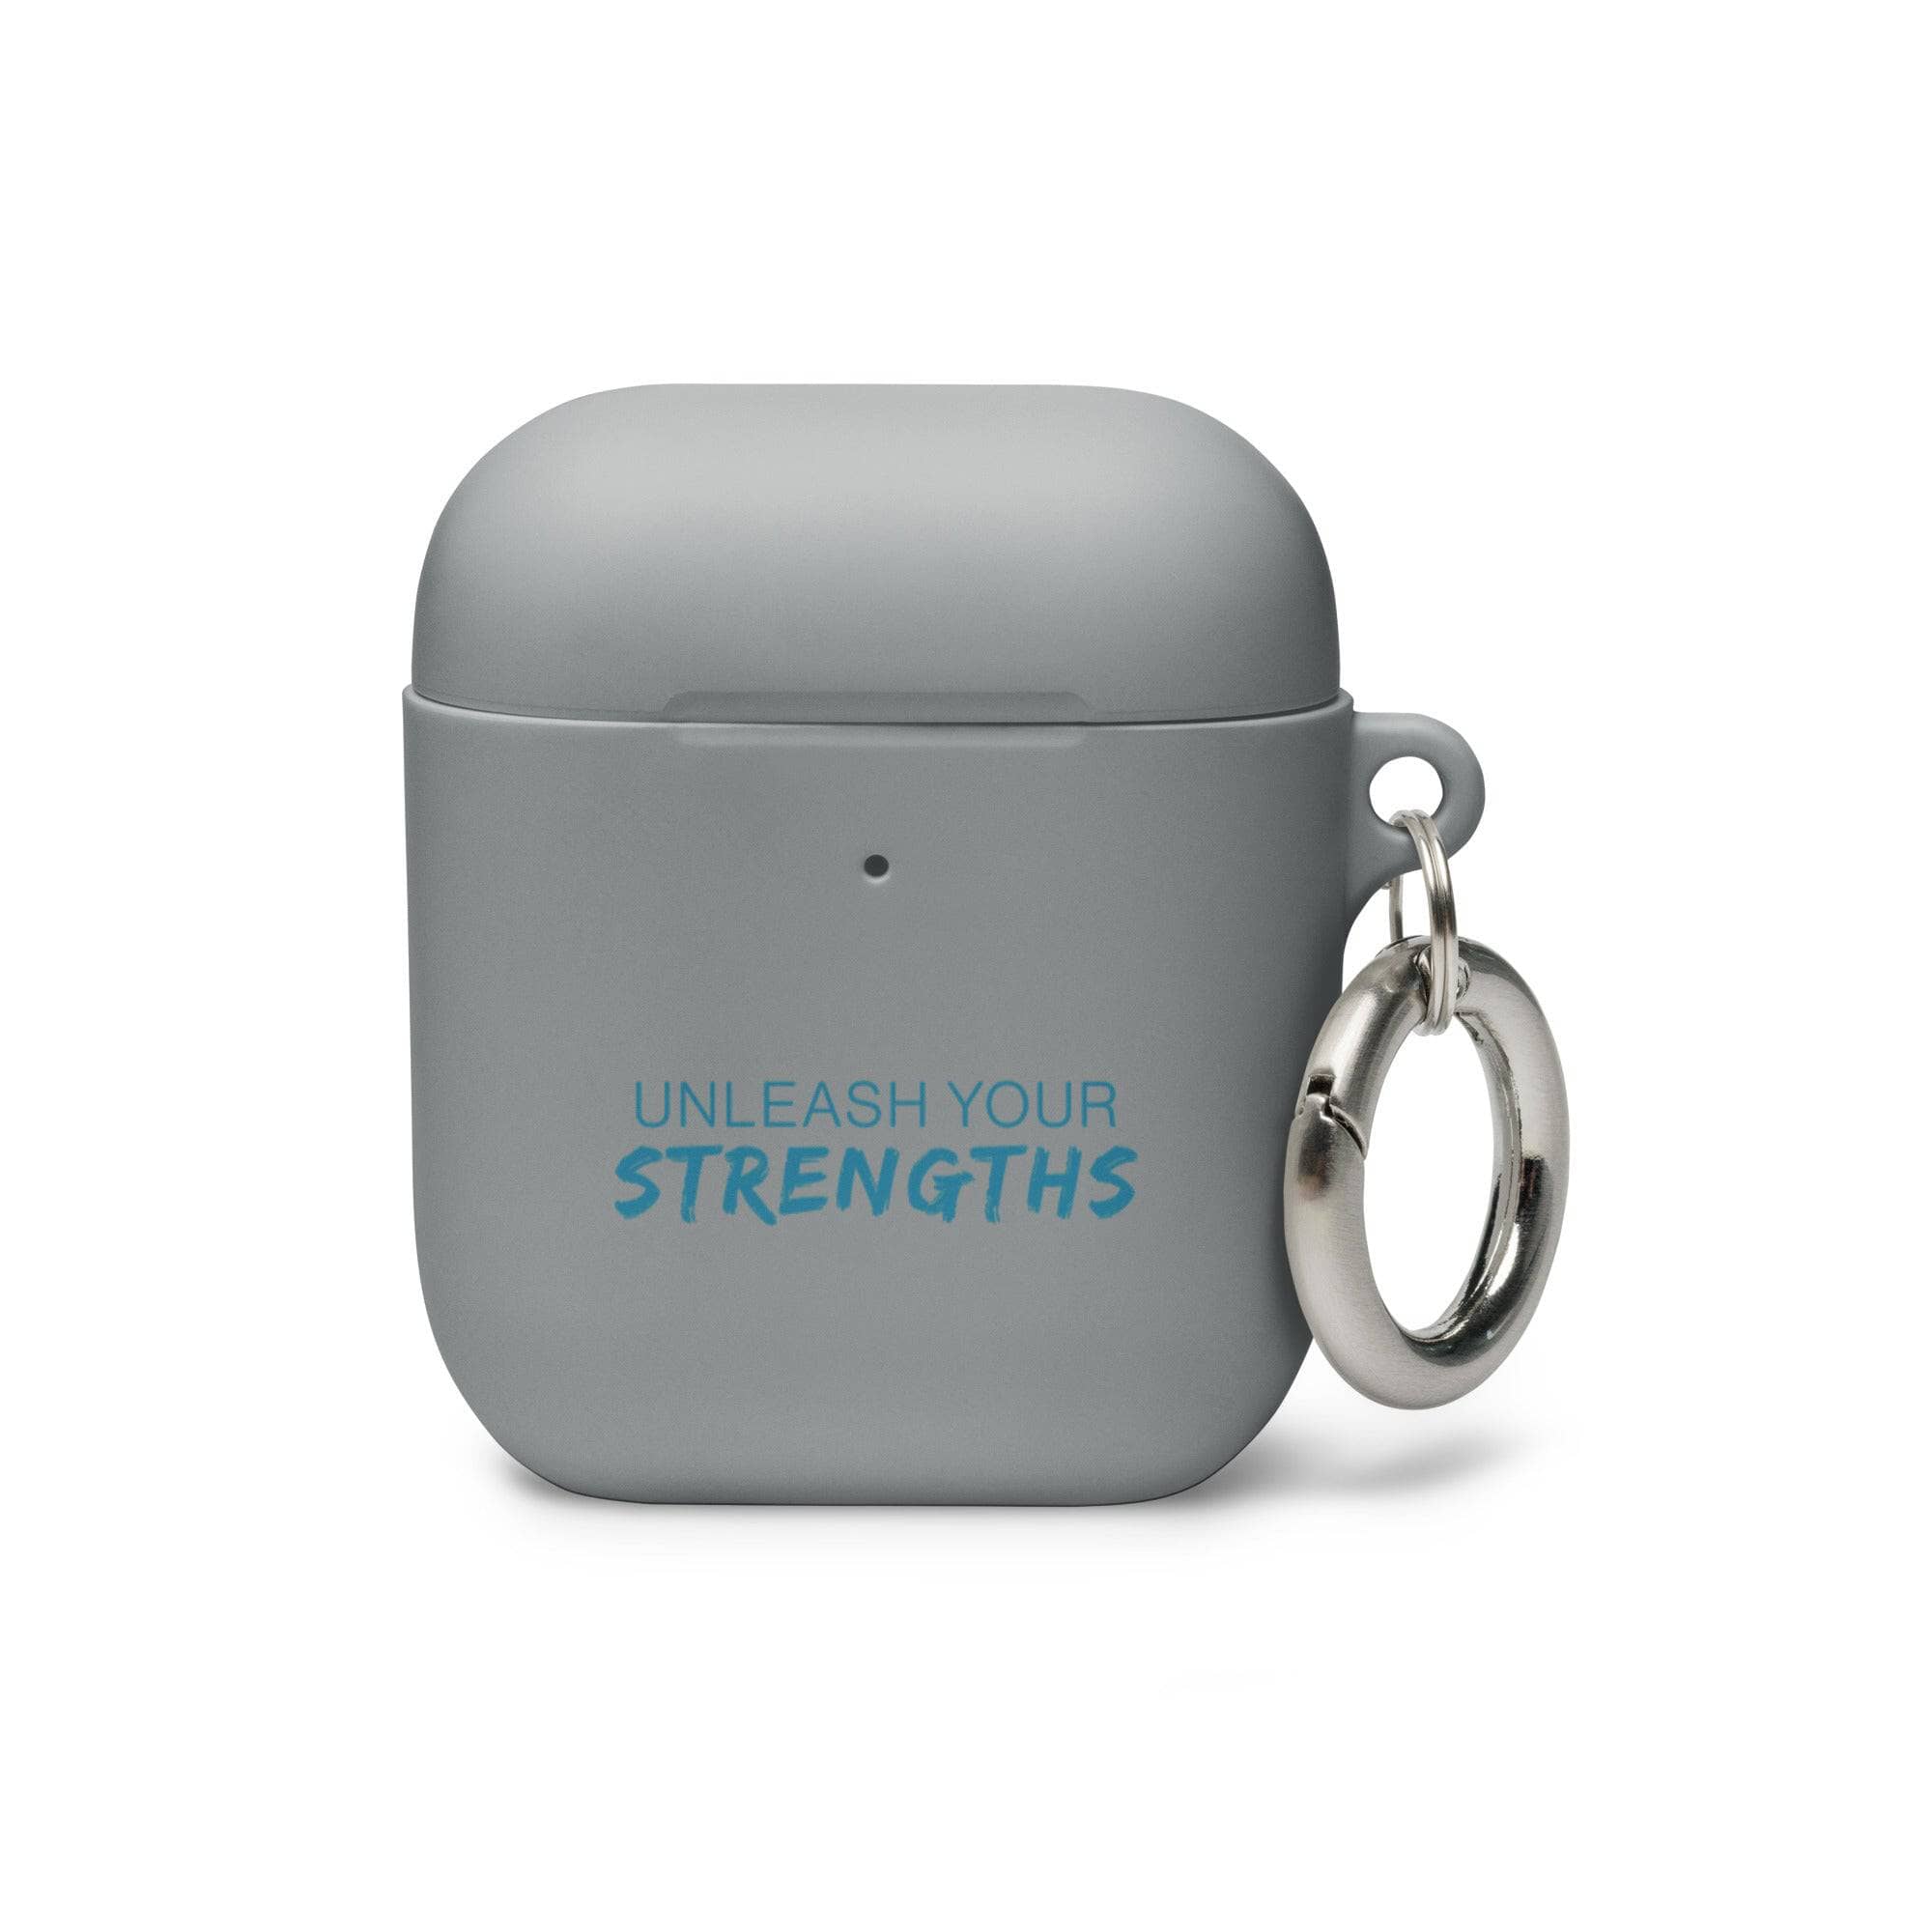 Unleash Your Strengths - AirPods case